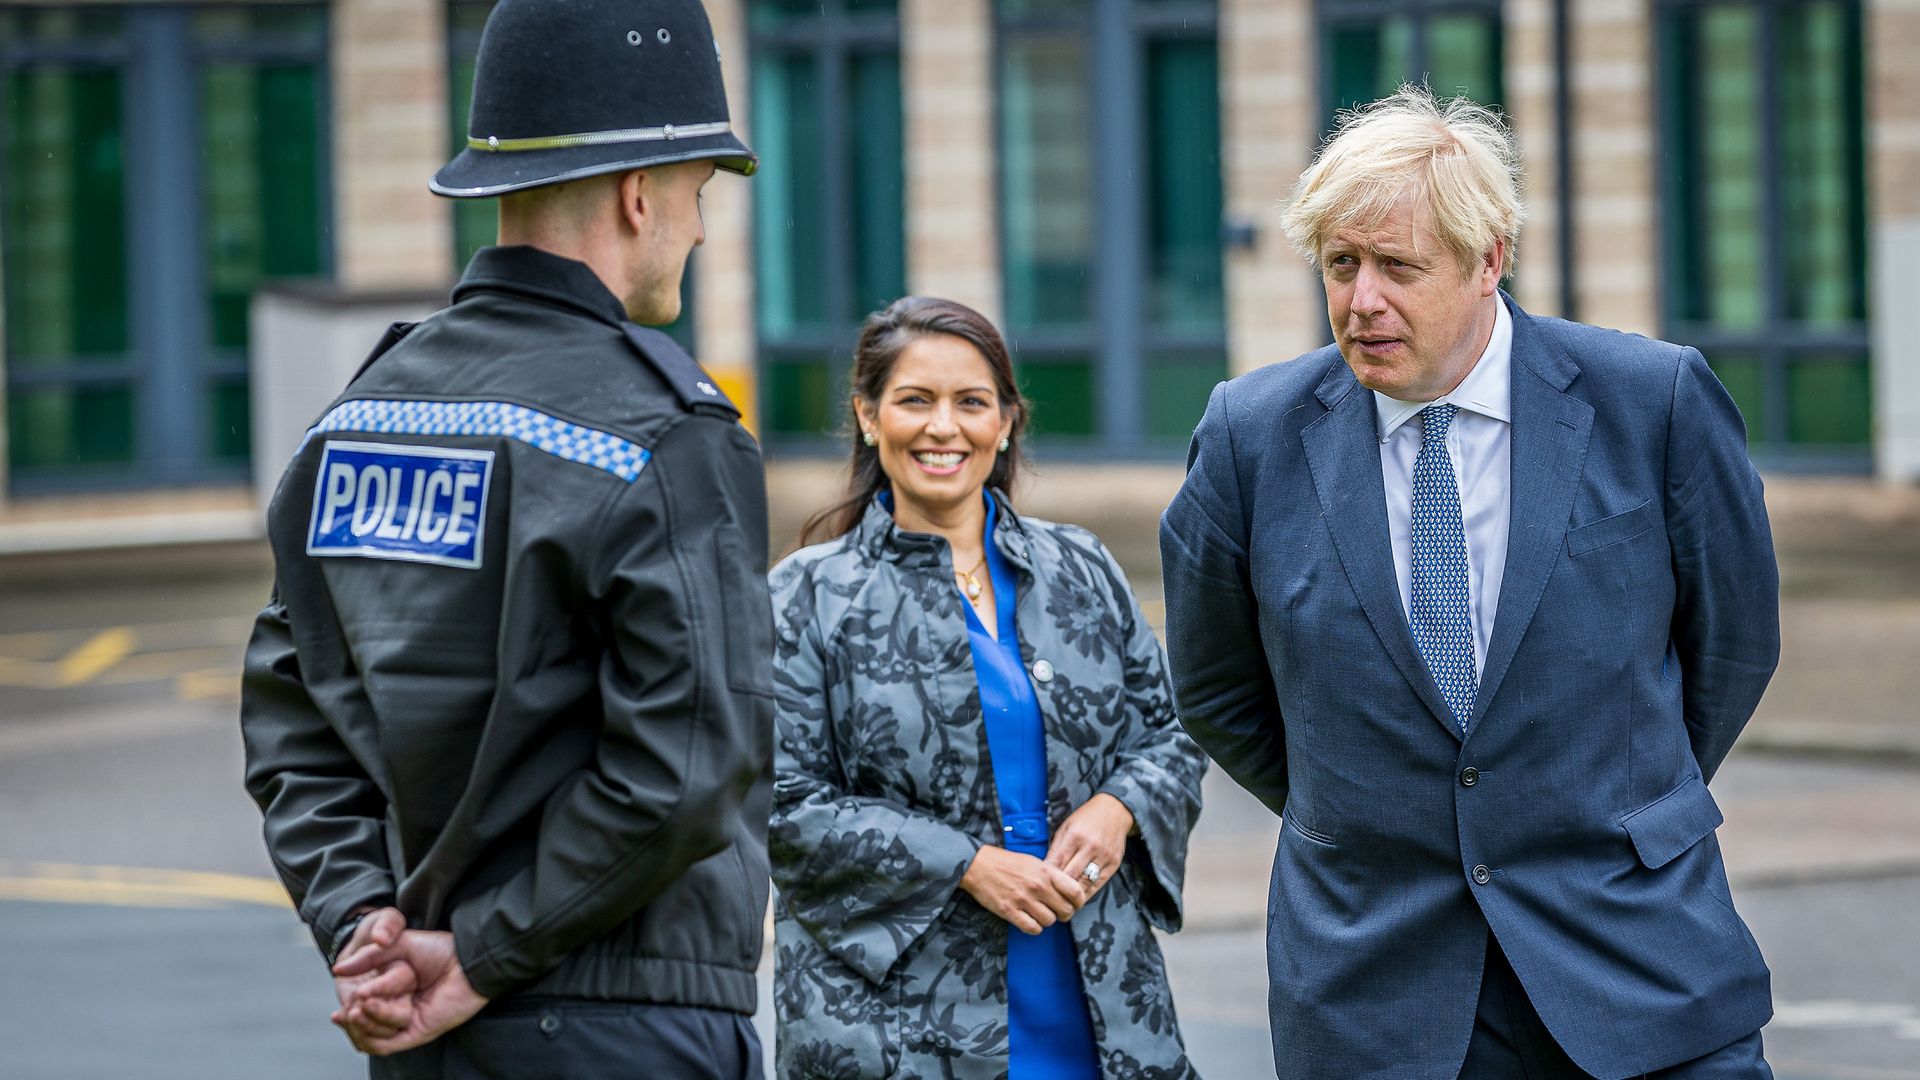 Prime Minister Boris Johnson and Home Secretary Priti Patel are introduced to recently graduated Police Officers - Credit: PA